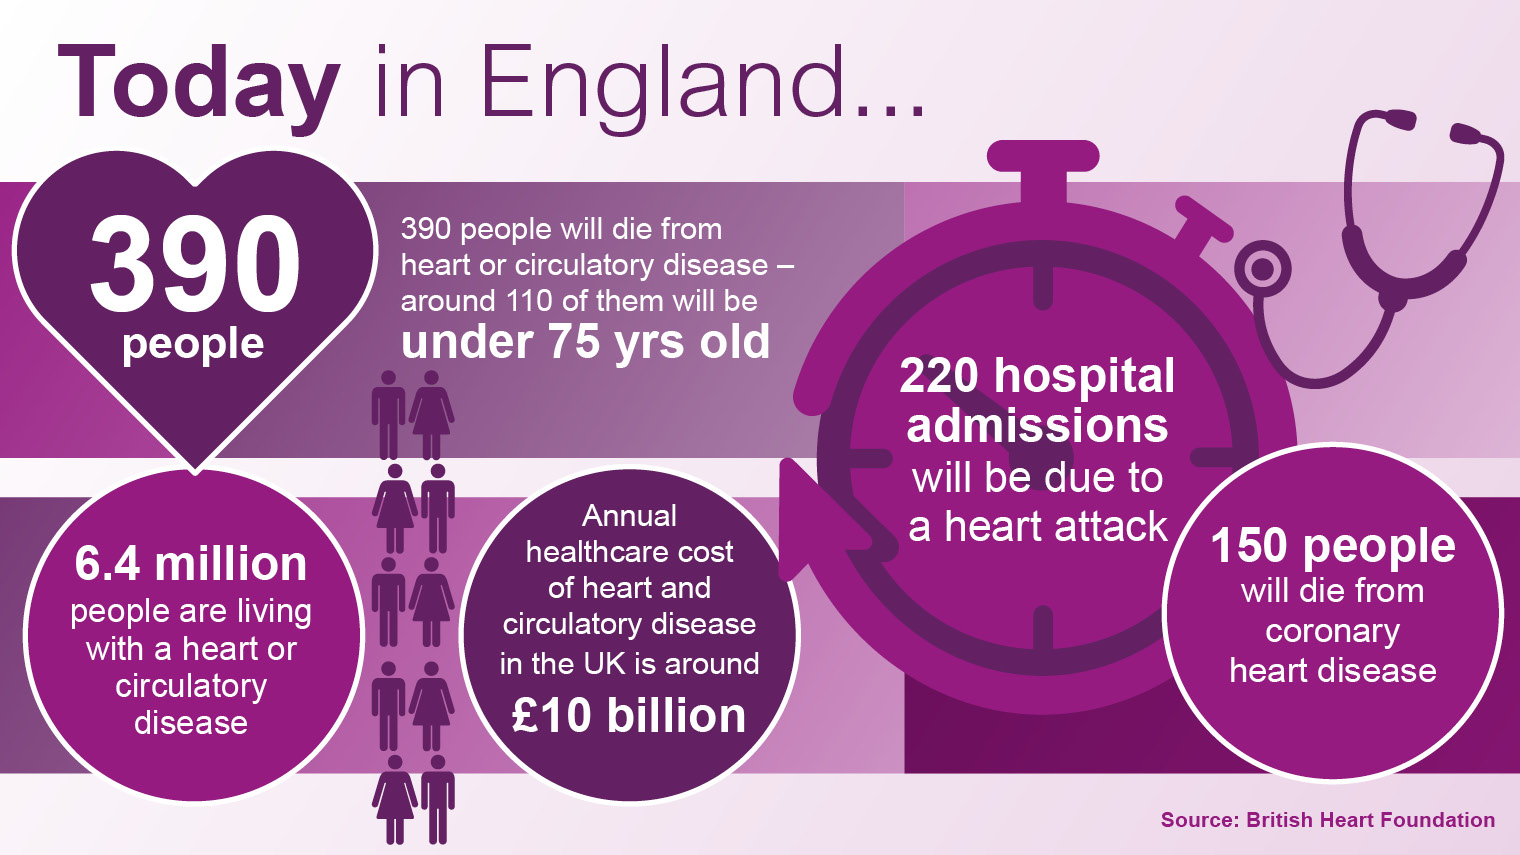 Today in England… 390 people will die from a heart or circulatory disease Around 110 of them will be younger than 75 6.4m people are living with a heart or circulatory disease 220 hospital admissions will be due to a heart attack 150 people will die from coronary heart disease  Source: British Heart Foundation